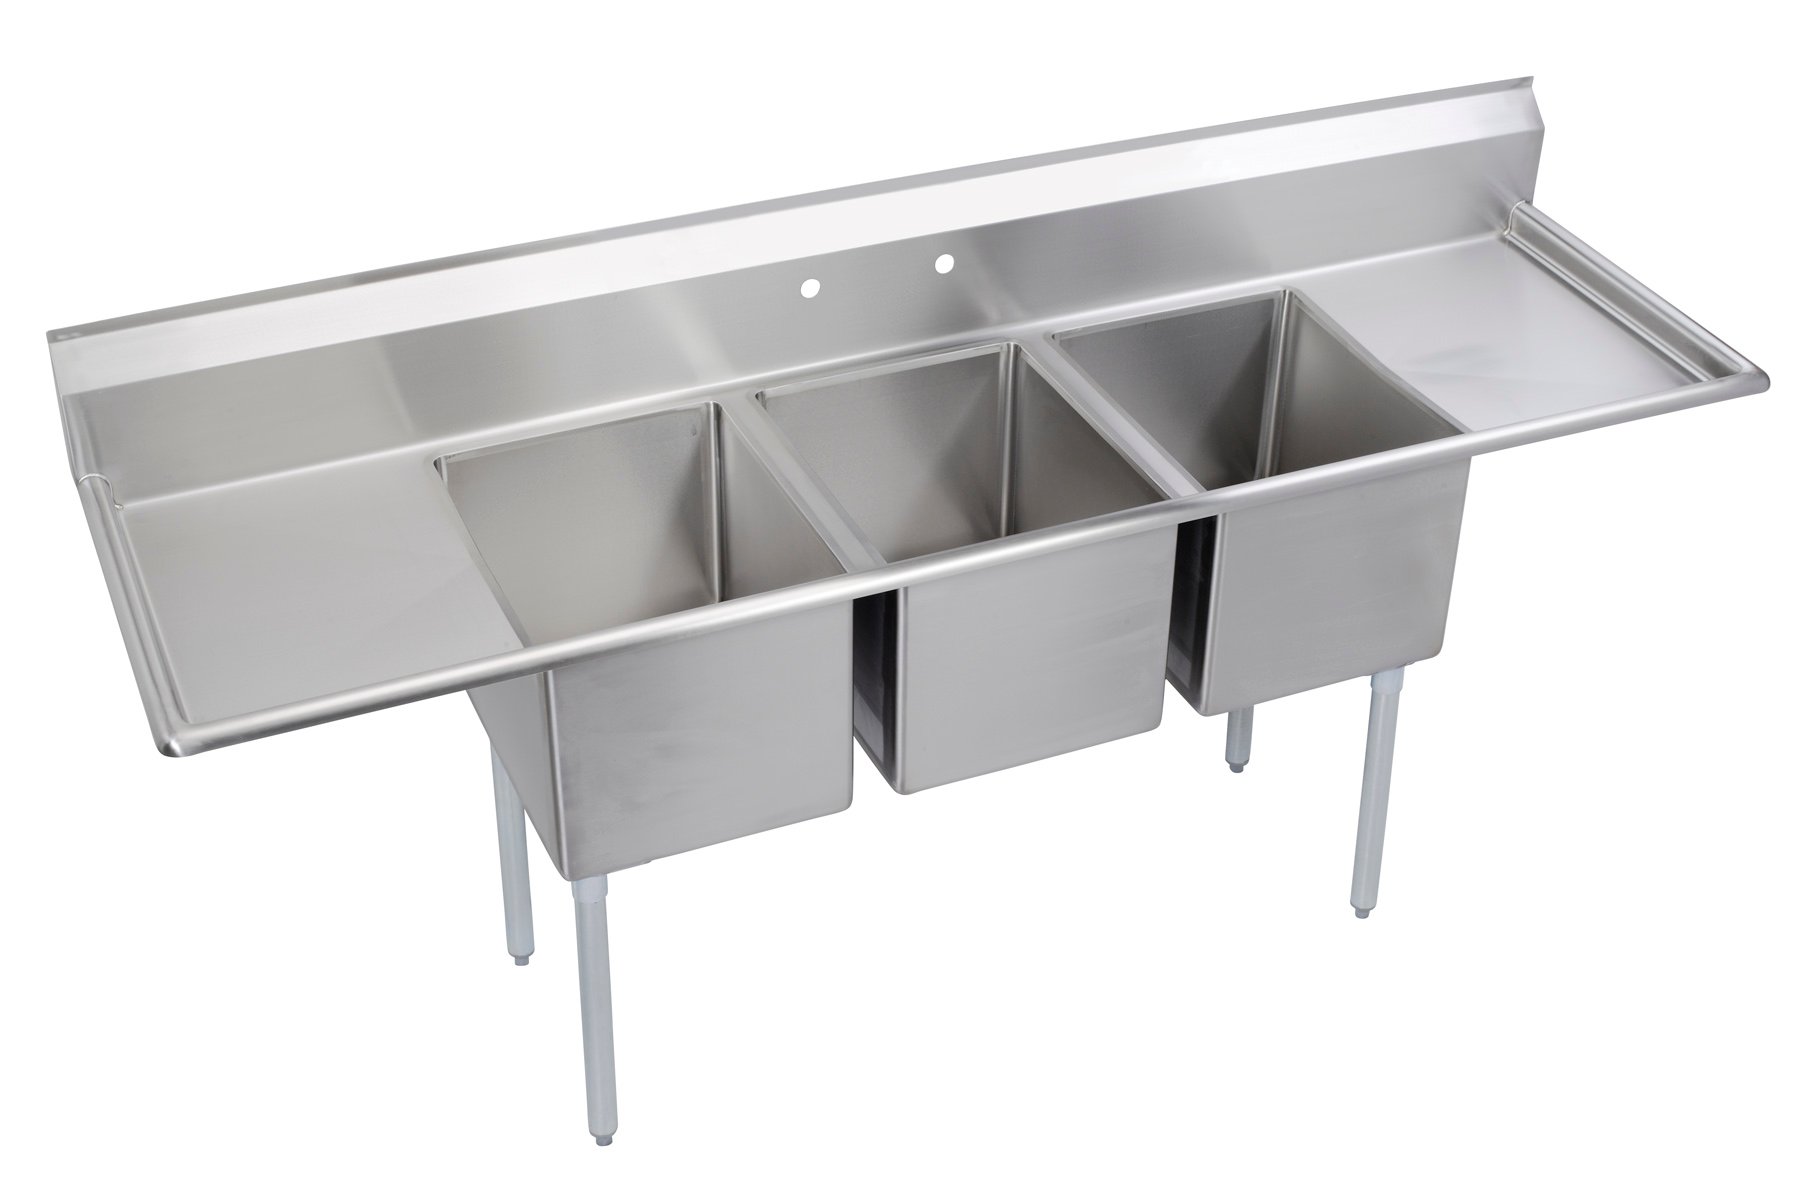 3 compartment commercial kitchen sink